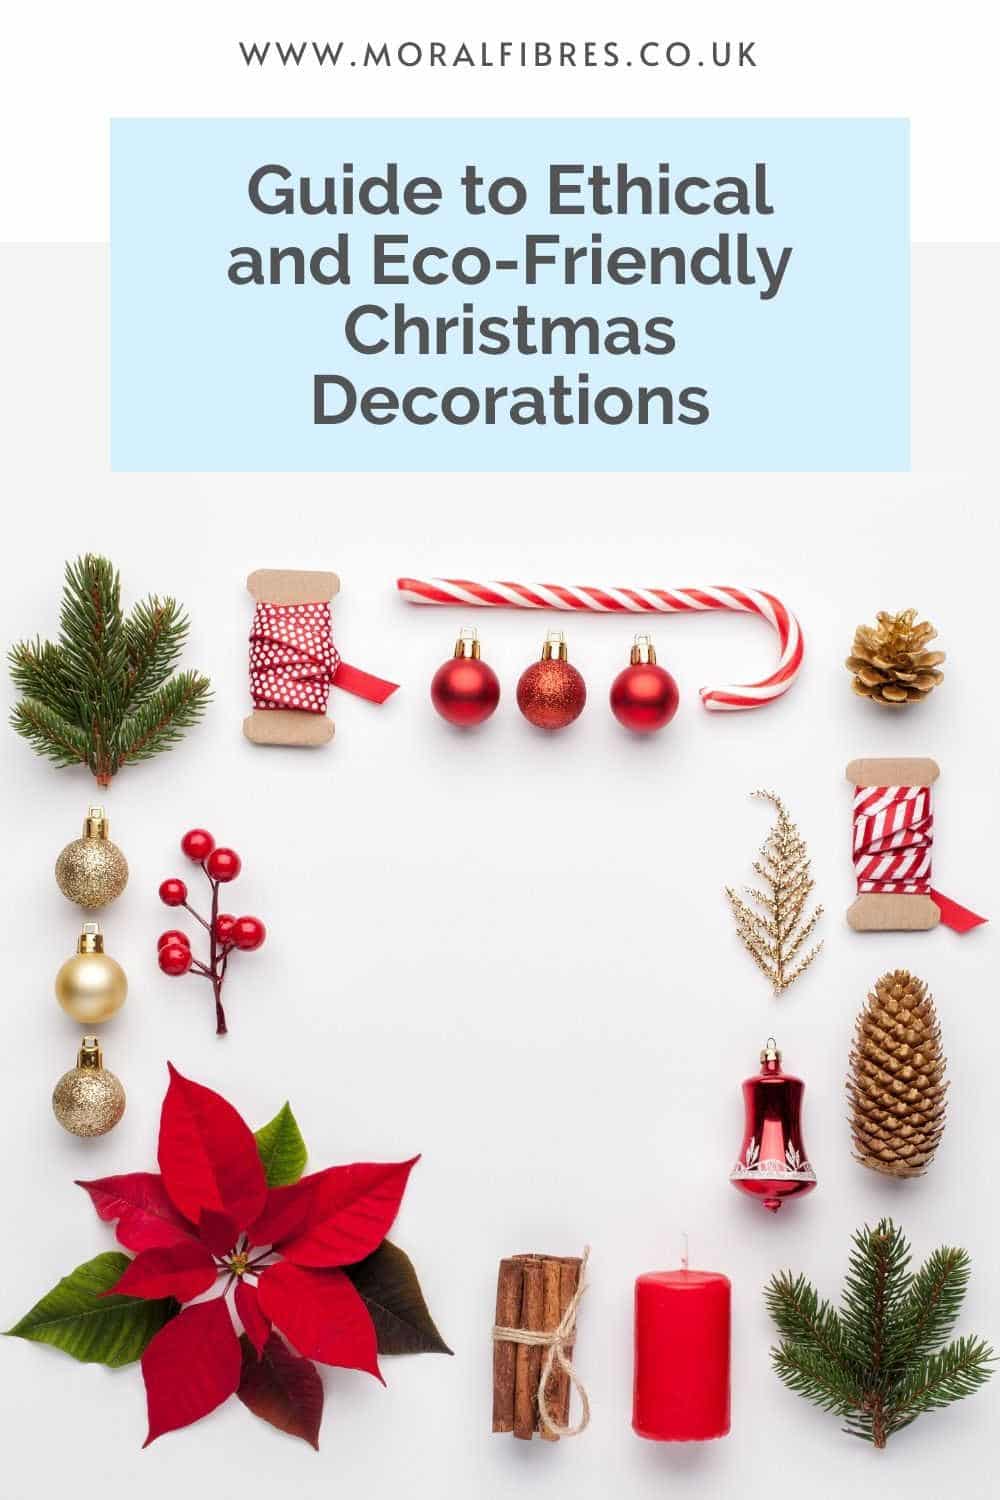 A flat lay of Christmas decorations on white background with a blue text box that says guide to ethical and eco-friendly Christmas decorations.